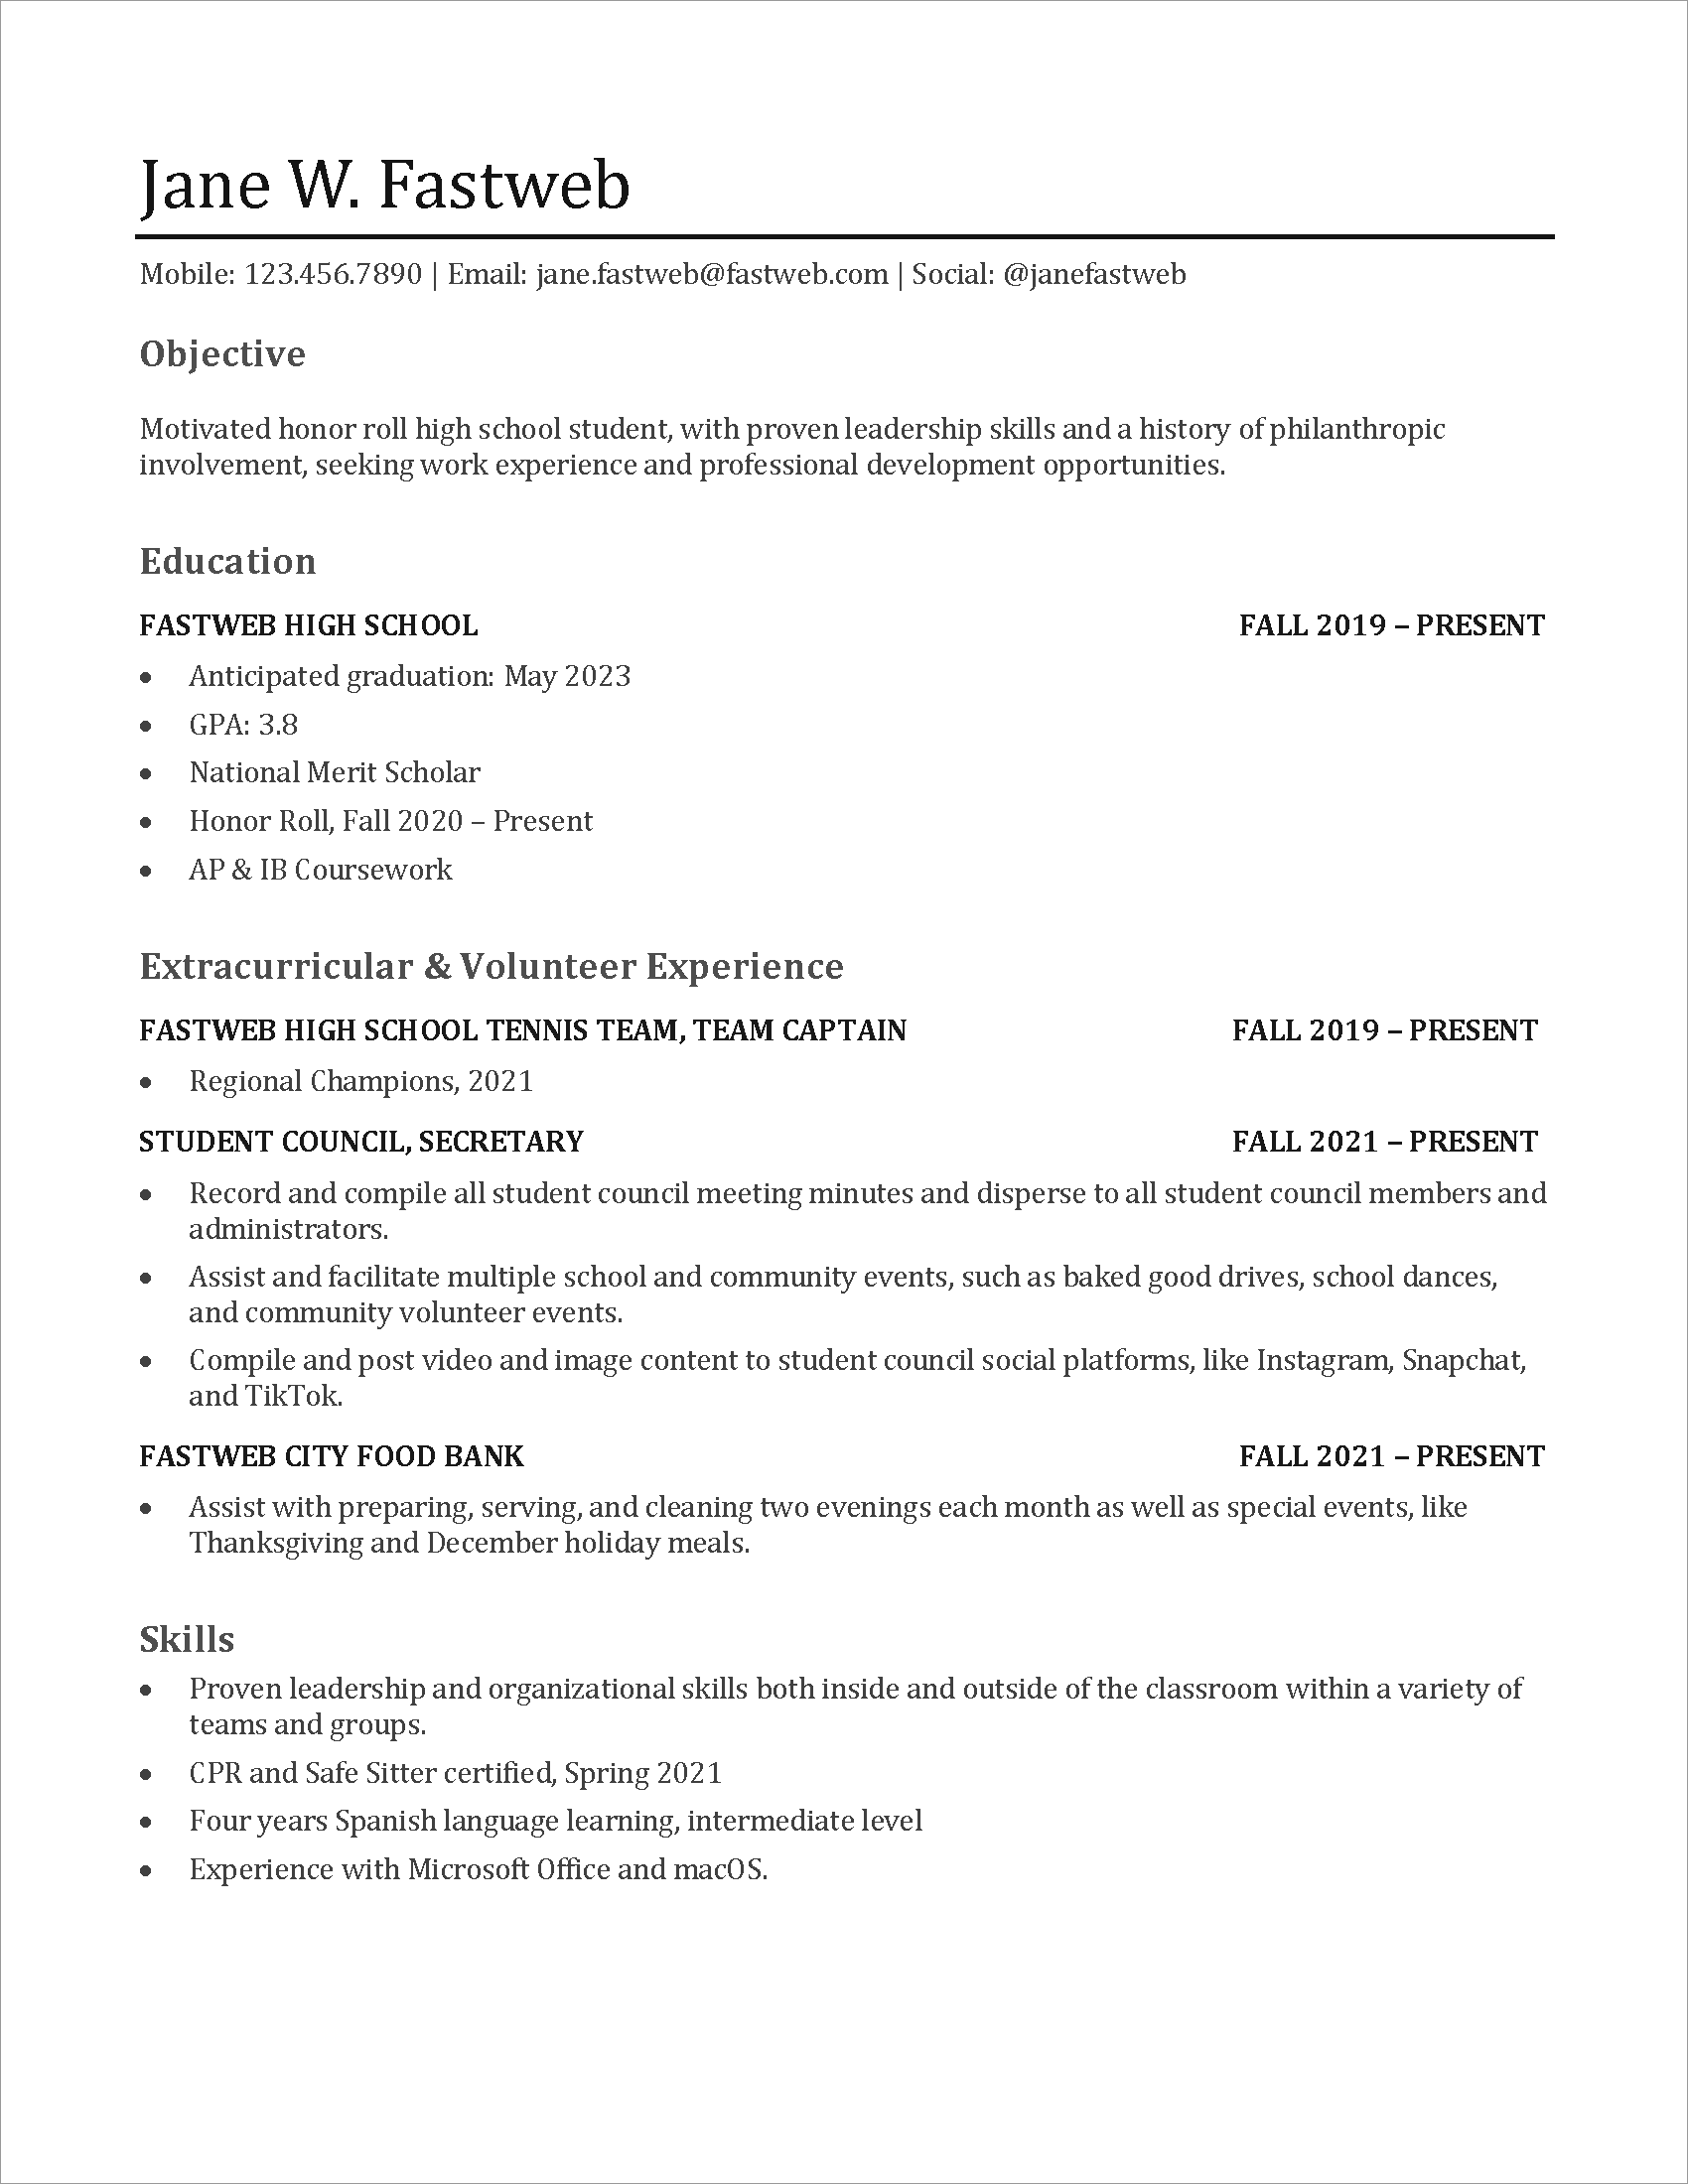 How to Write a Resume with No Experience + (Free) Examples